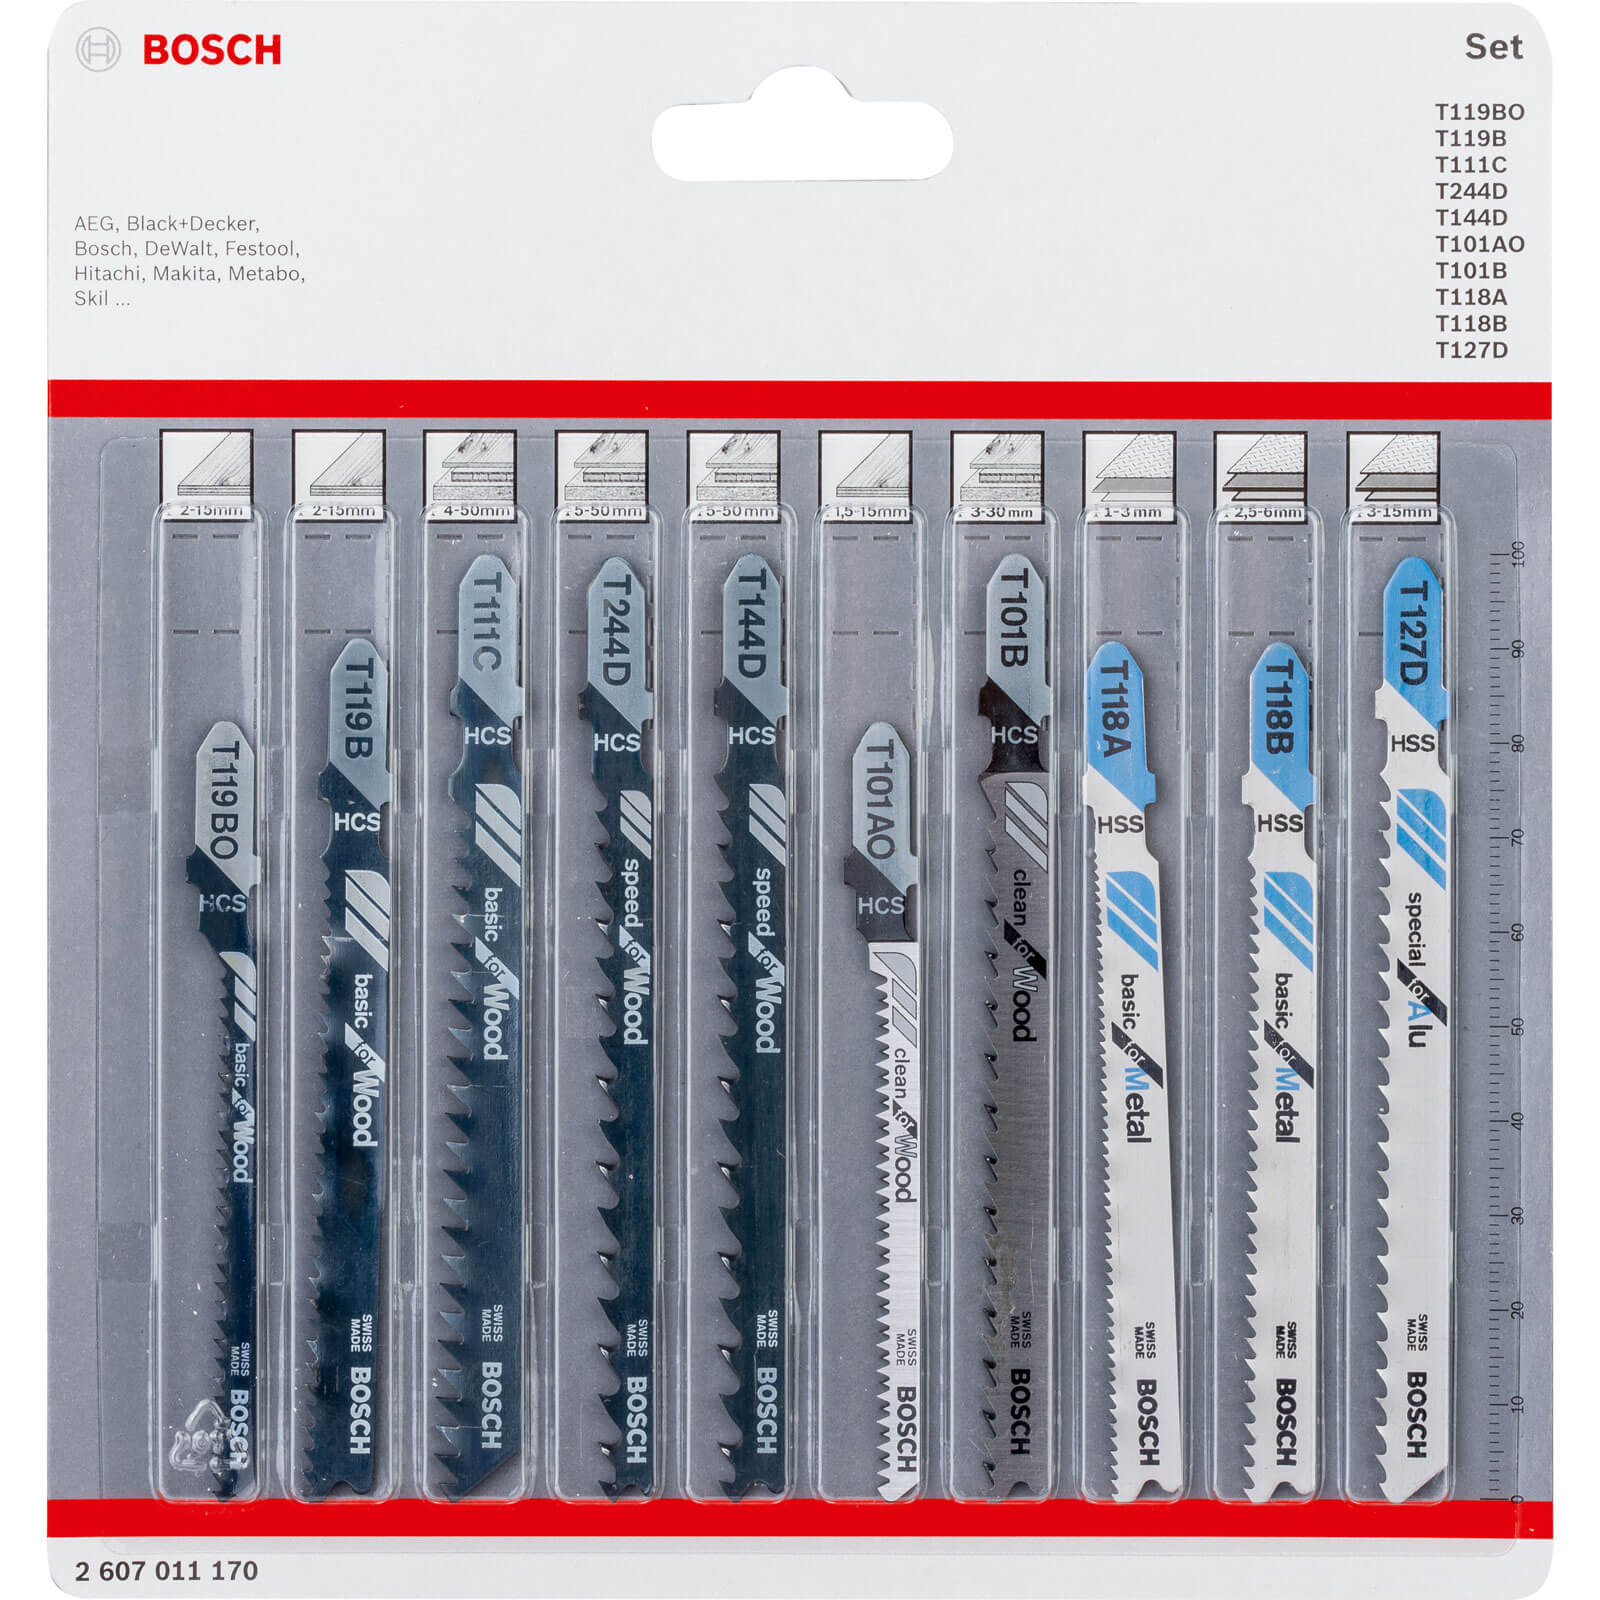 Image of Bosch 10 Piece Jigsaw Blade Set for Wood and Metal